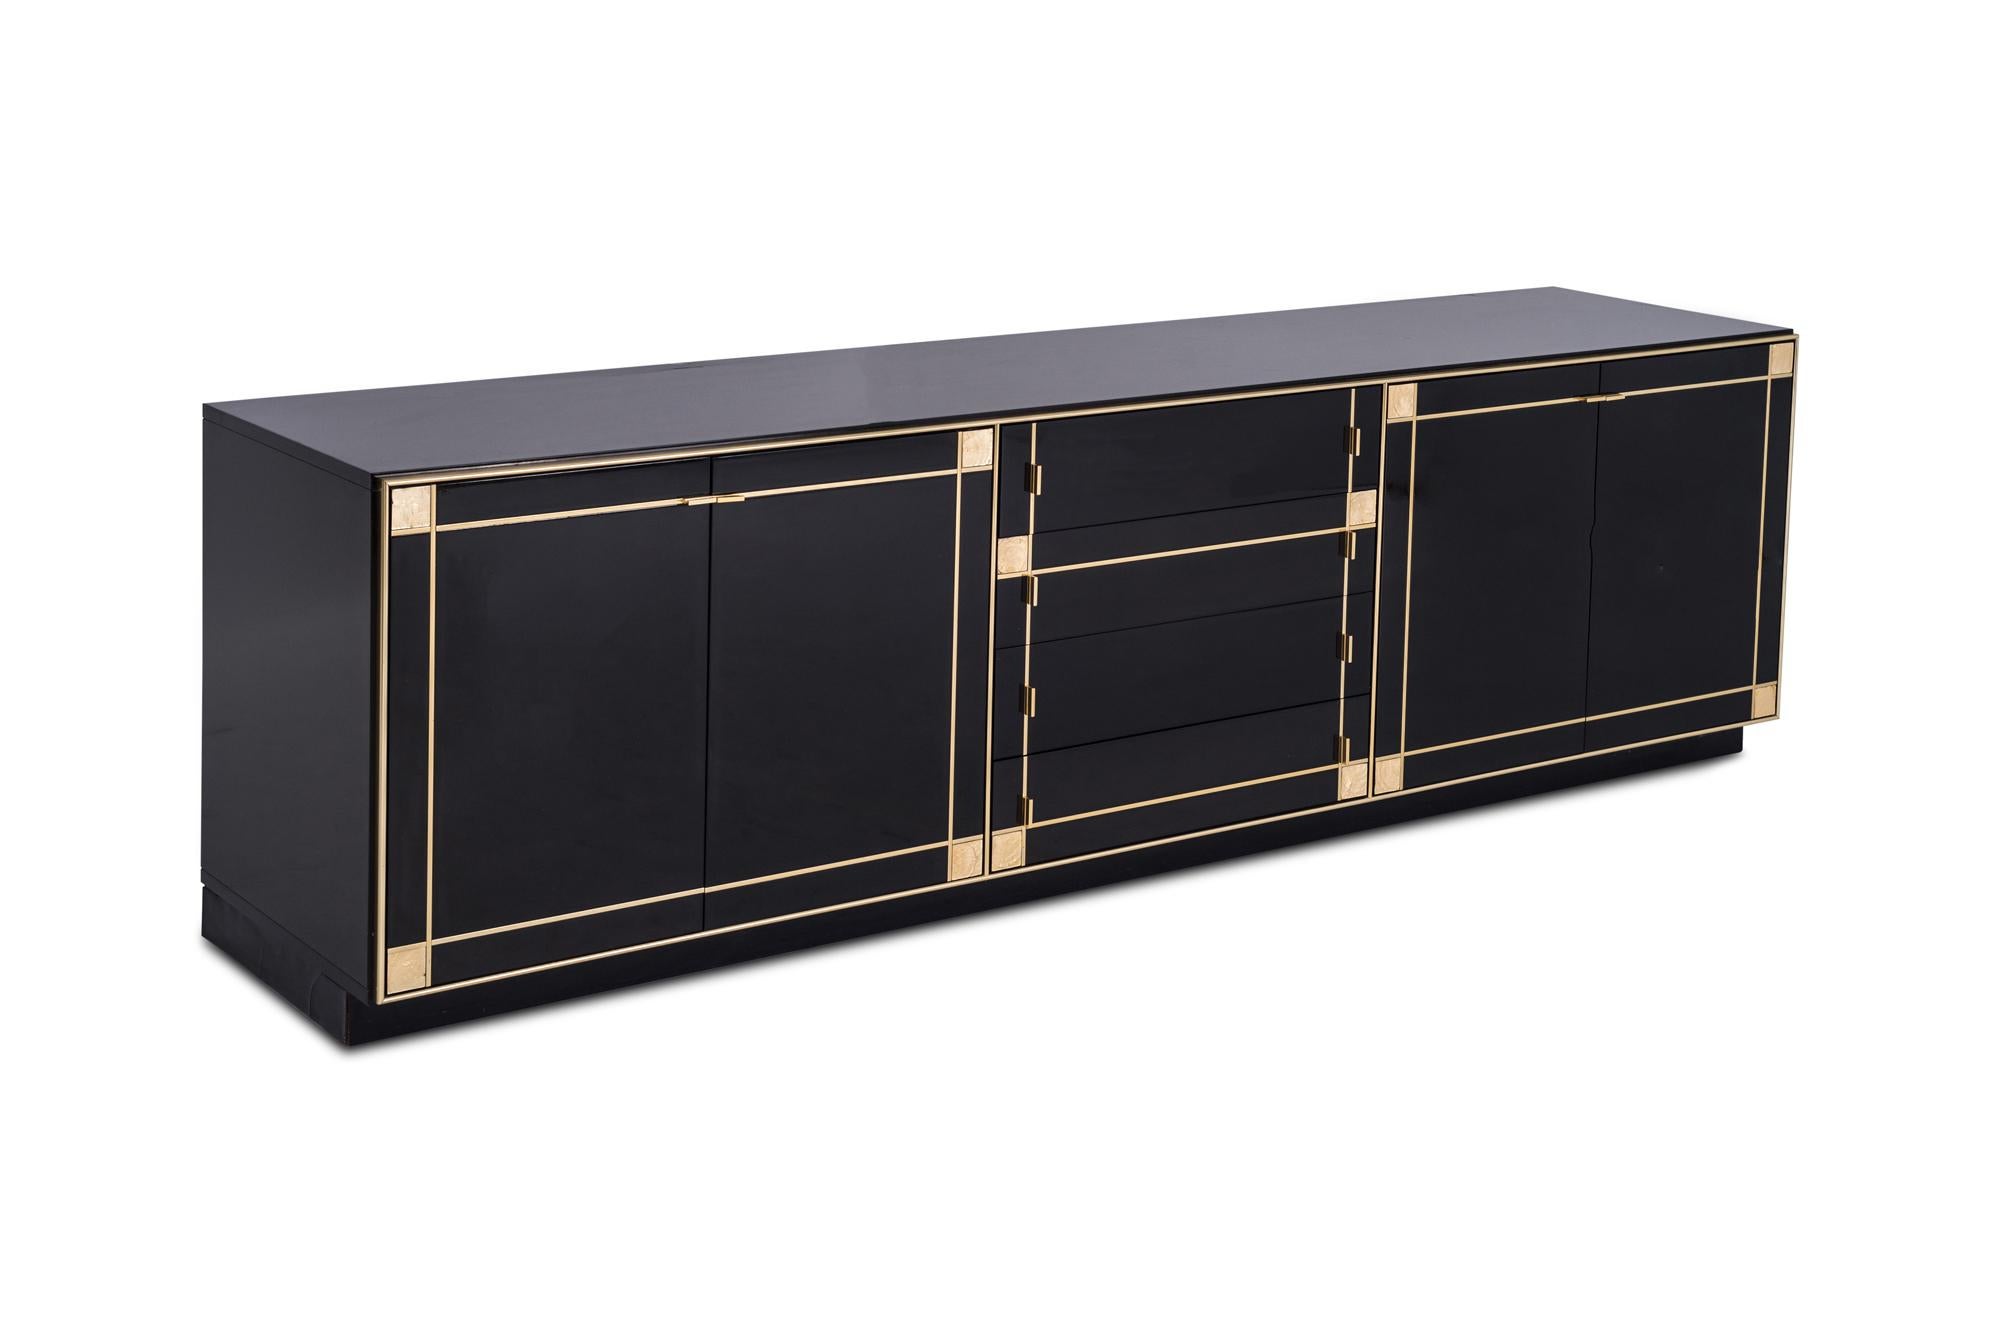 Hollywood Regency credenza in the style of Maison Jansen, designed by French designer Pierre Cardin in the 1980s. 

This large credenza with four cabinets and four large drawers provides plenty of storage space. The front of the cabinet is